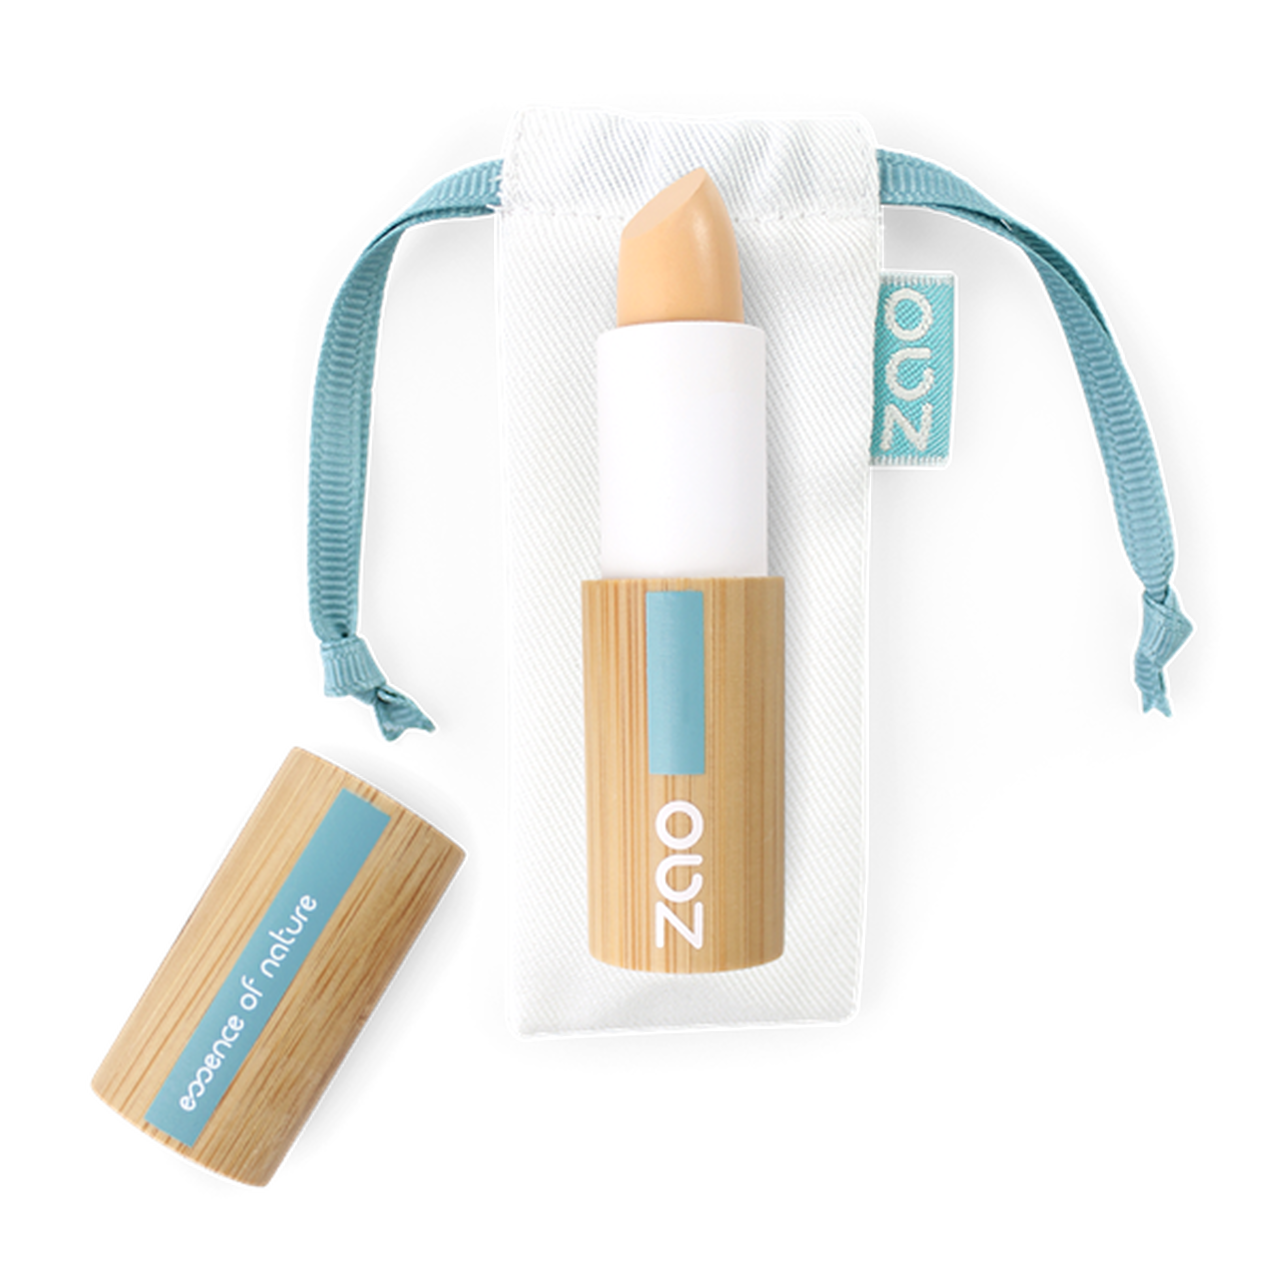 Load image into Gallery viewer, Zao concealer provides natural looking coverage to help conceal blemishes and imperfections | Sustainable Low Waste Makeup | Cruelty Free
